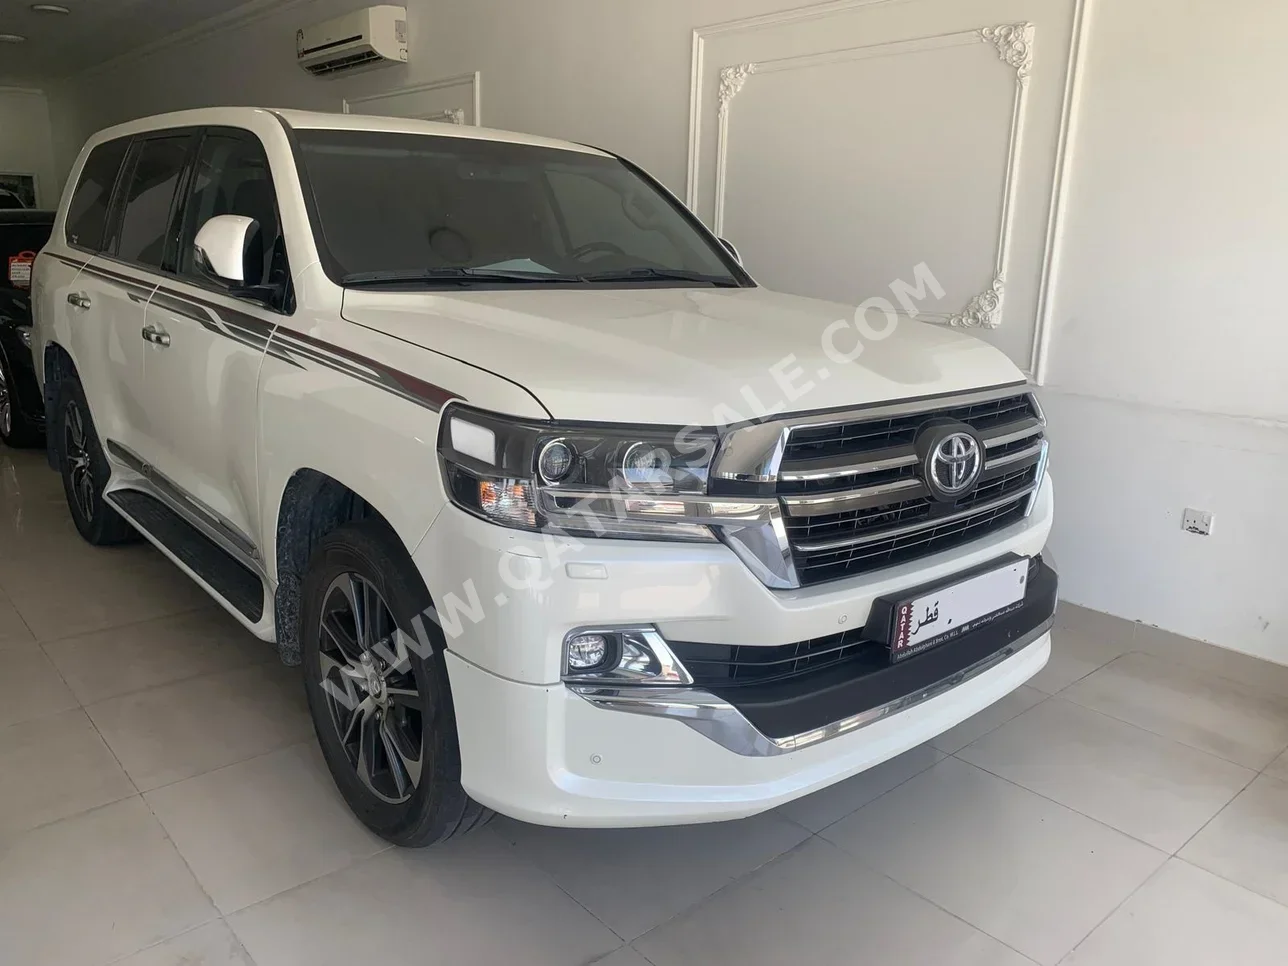 Toyota  Land Cruiser  GXR- Grand Touring  2020  Automatic  144,000 Km  8 Cylinder  Four Wheel Drive (4WD)  SUV  White